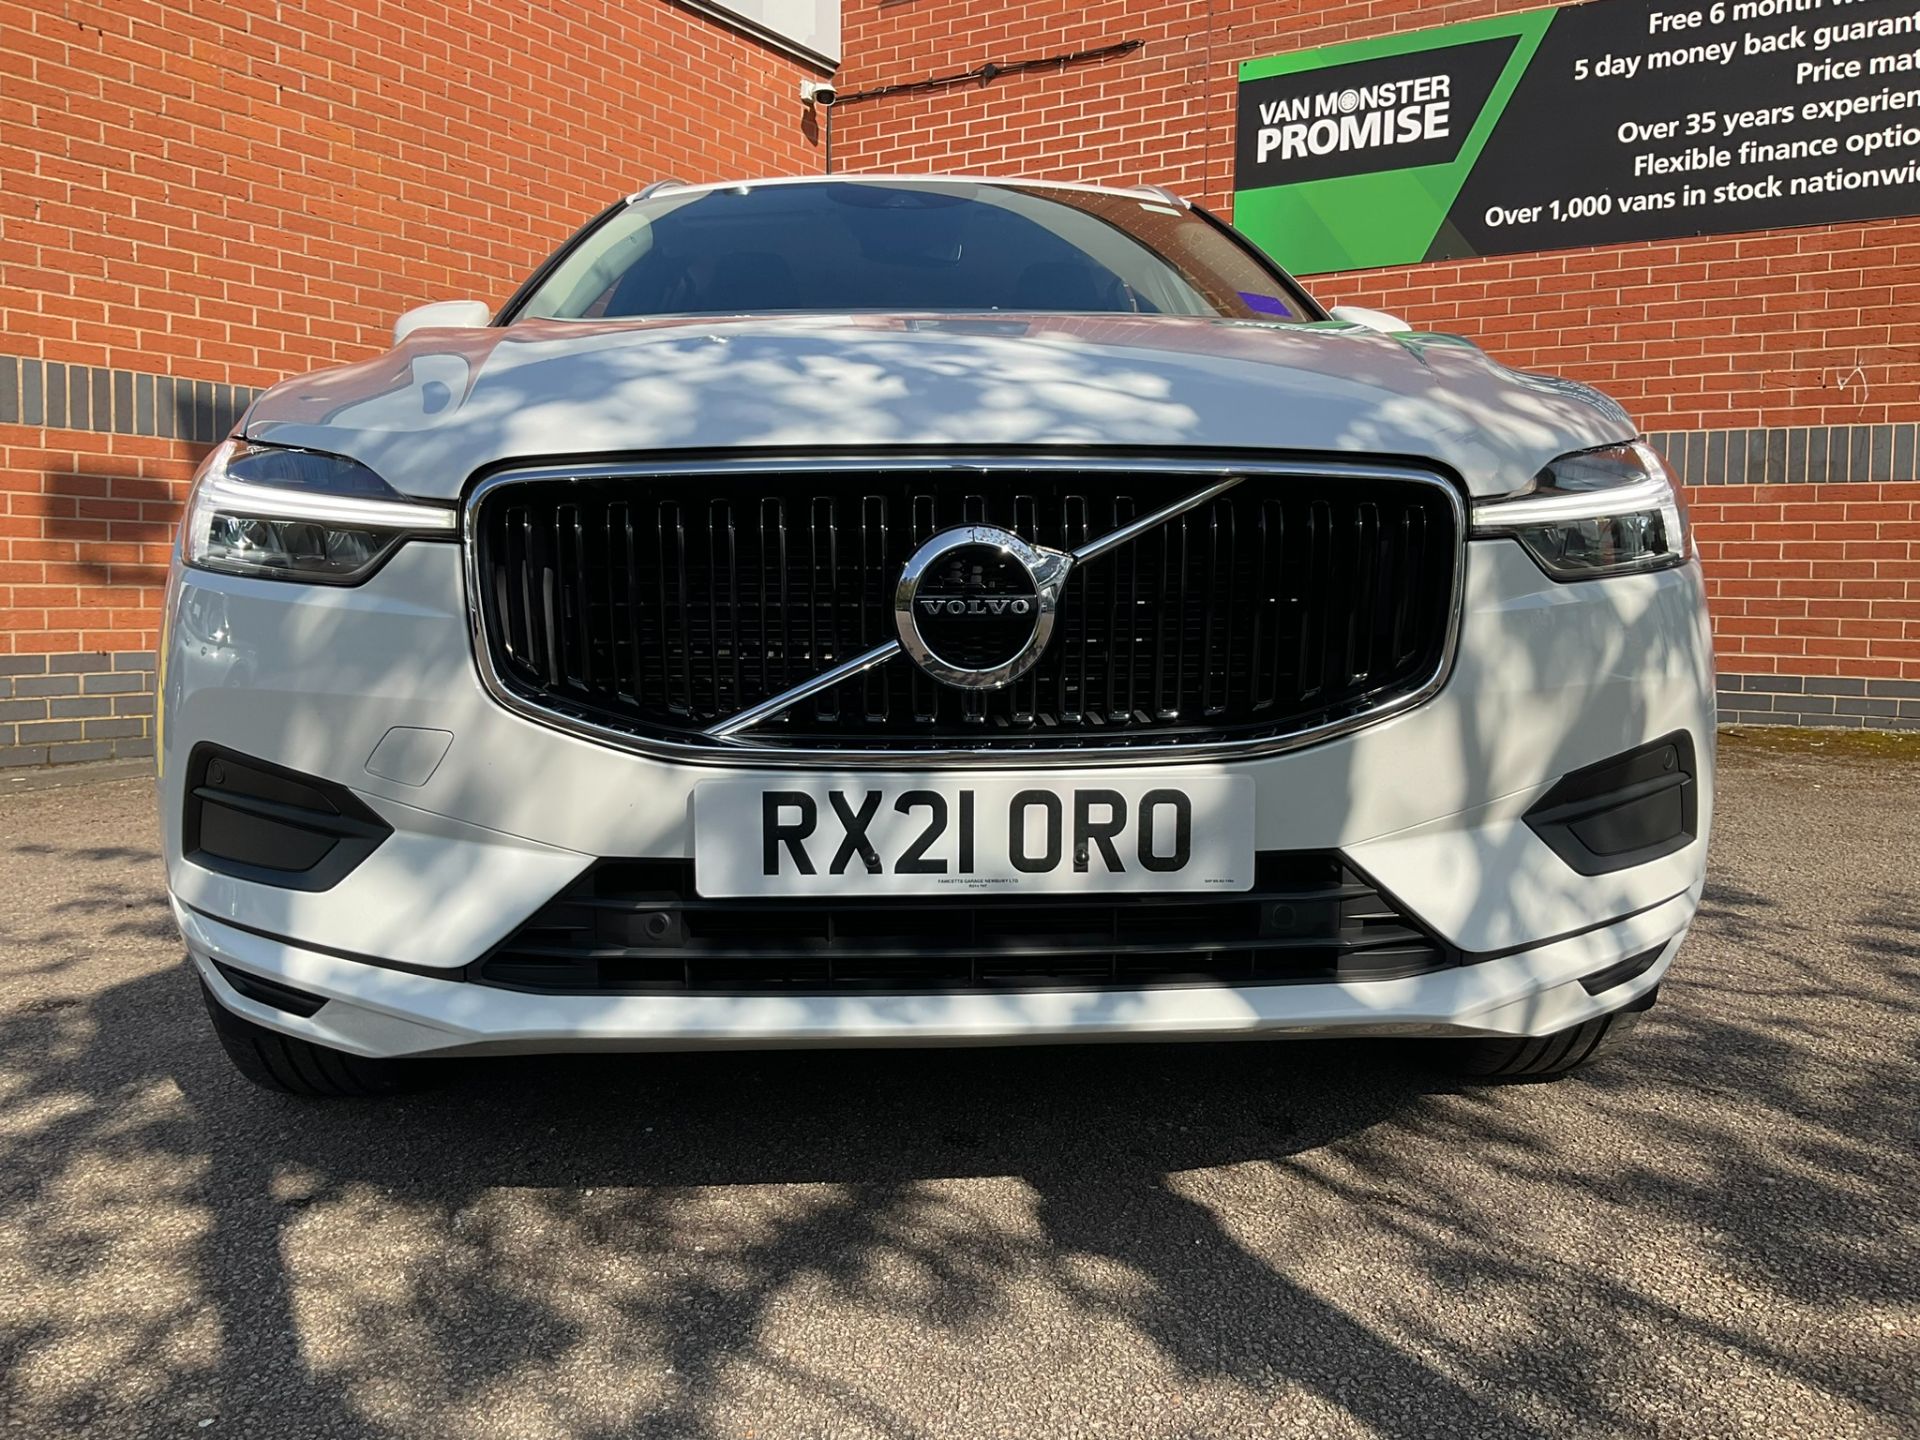 2021 Volvo Xc60 2.0 B5p [250] Momentum 5Dr Awd Geartronic (RX21ORO) Image 2